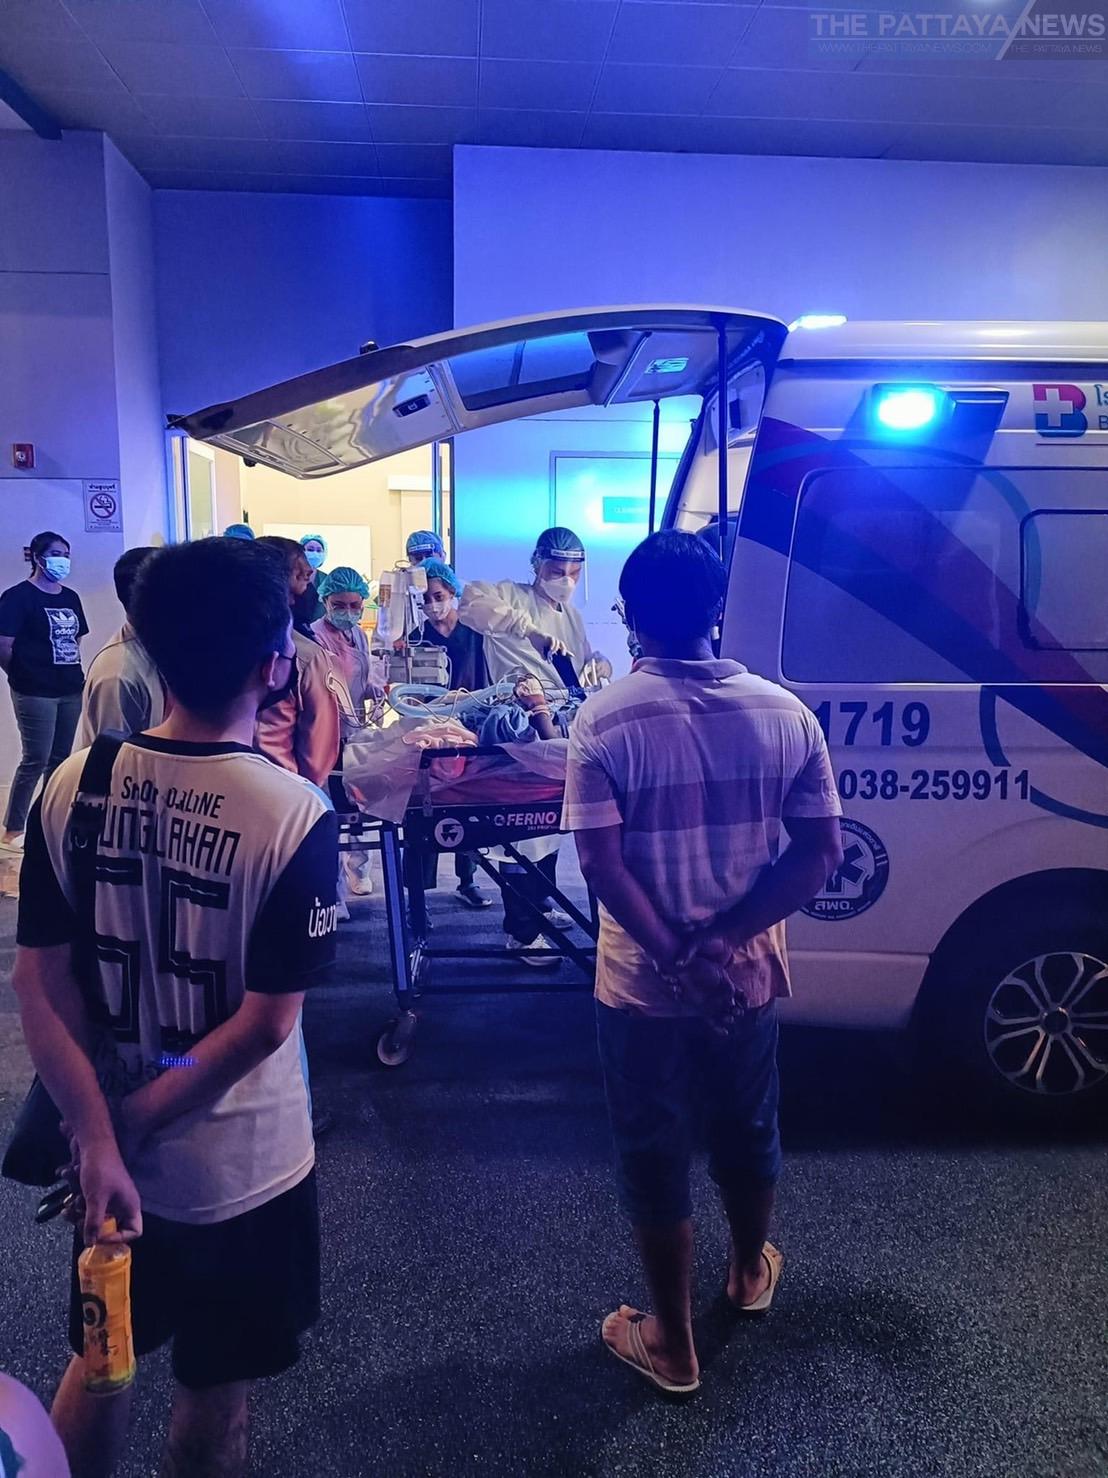 Man shot in the throat following a Facebook argument in Pattaya